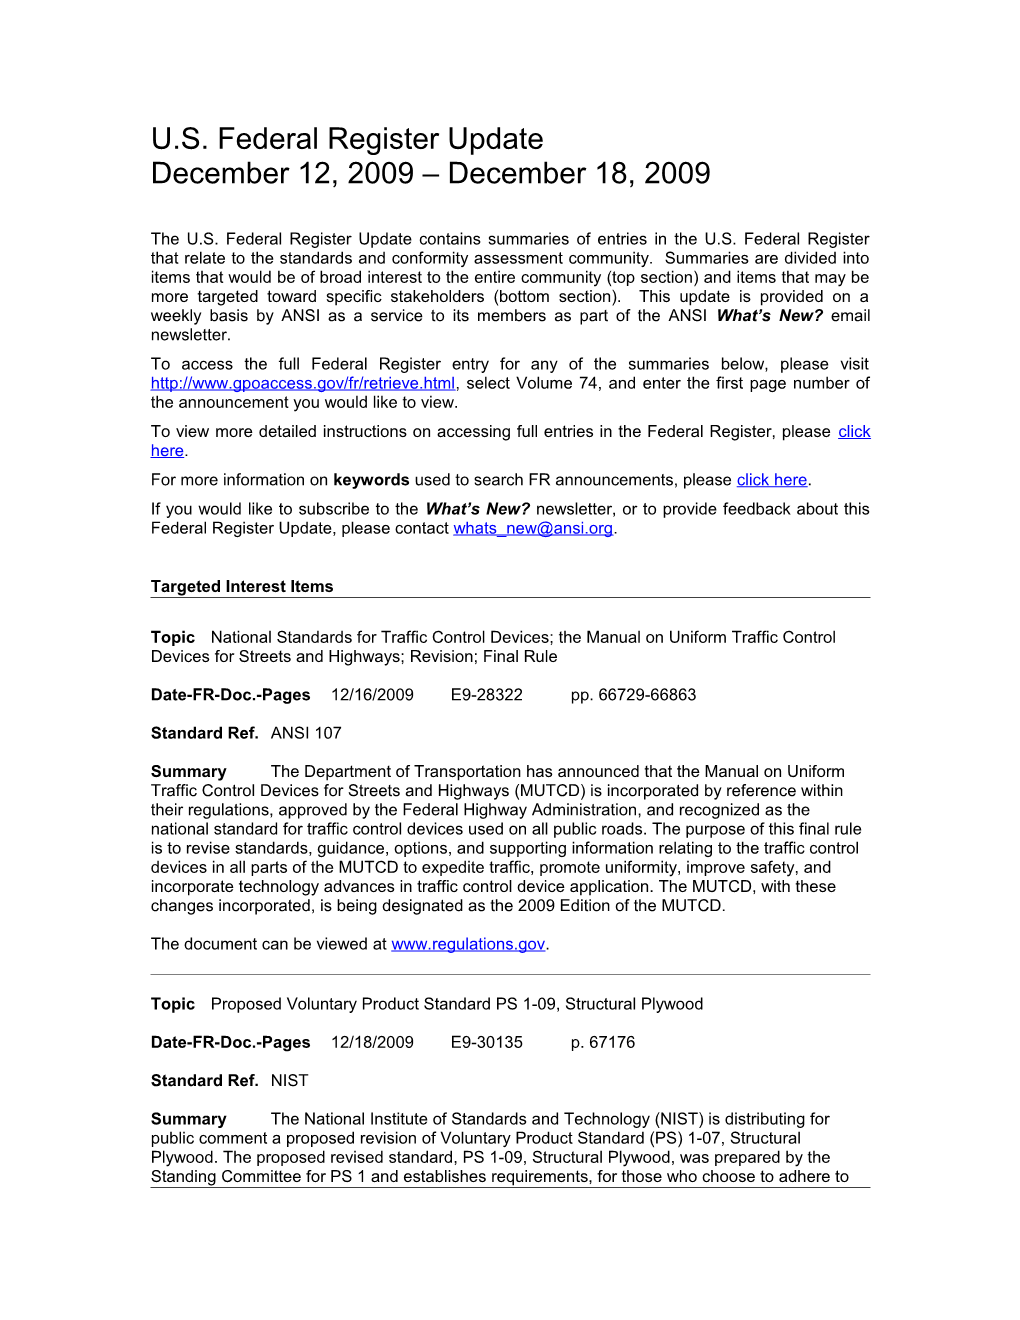 Standards and Trade Related Notices from the U.S. Federal Register, 12.18.09